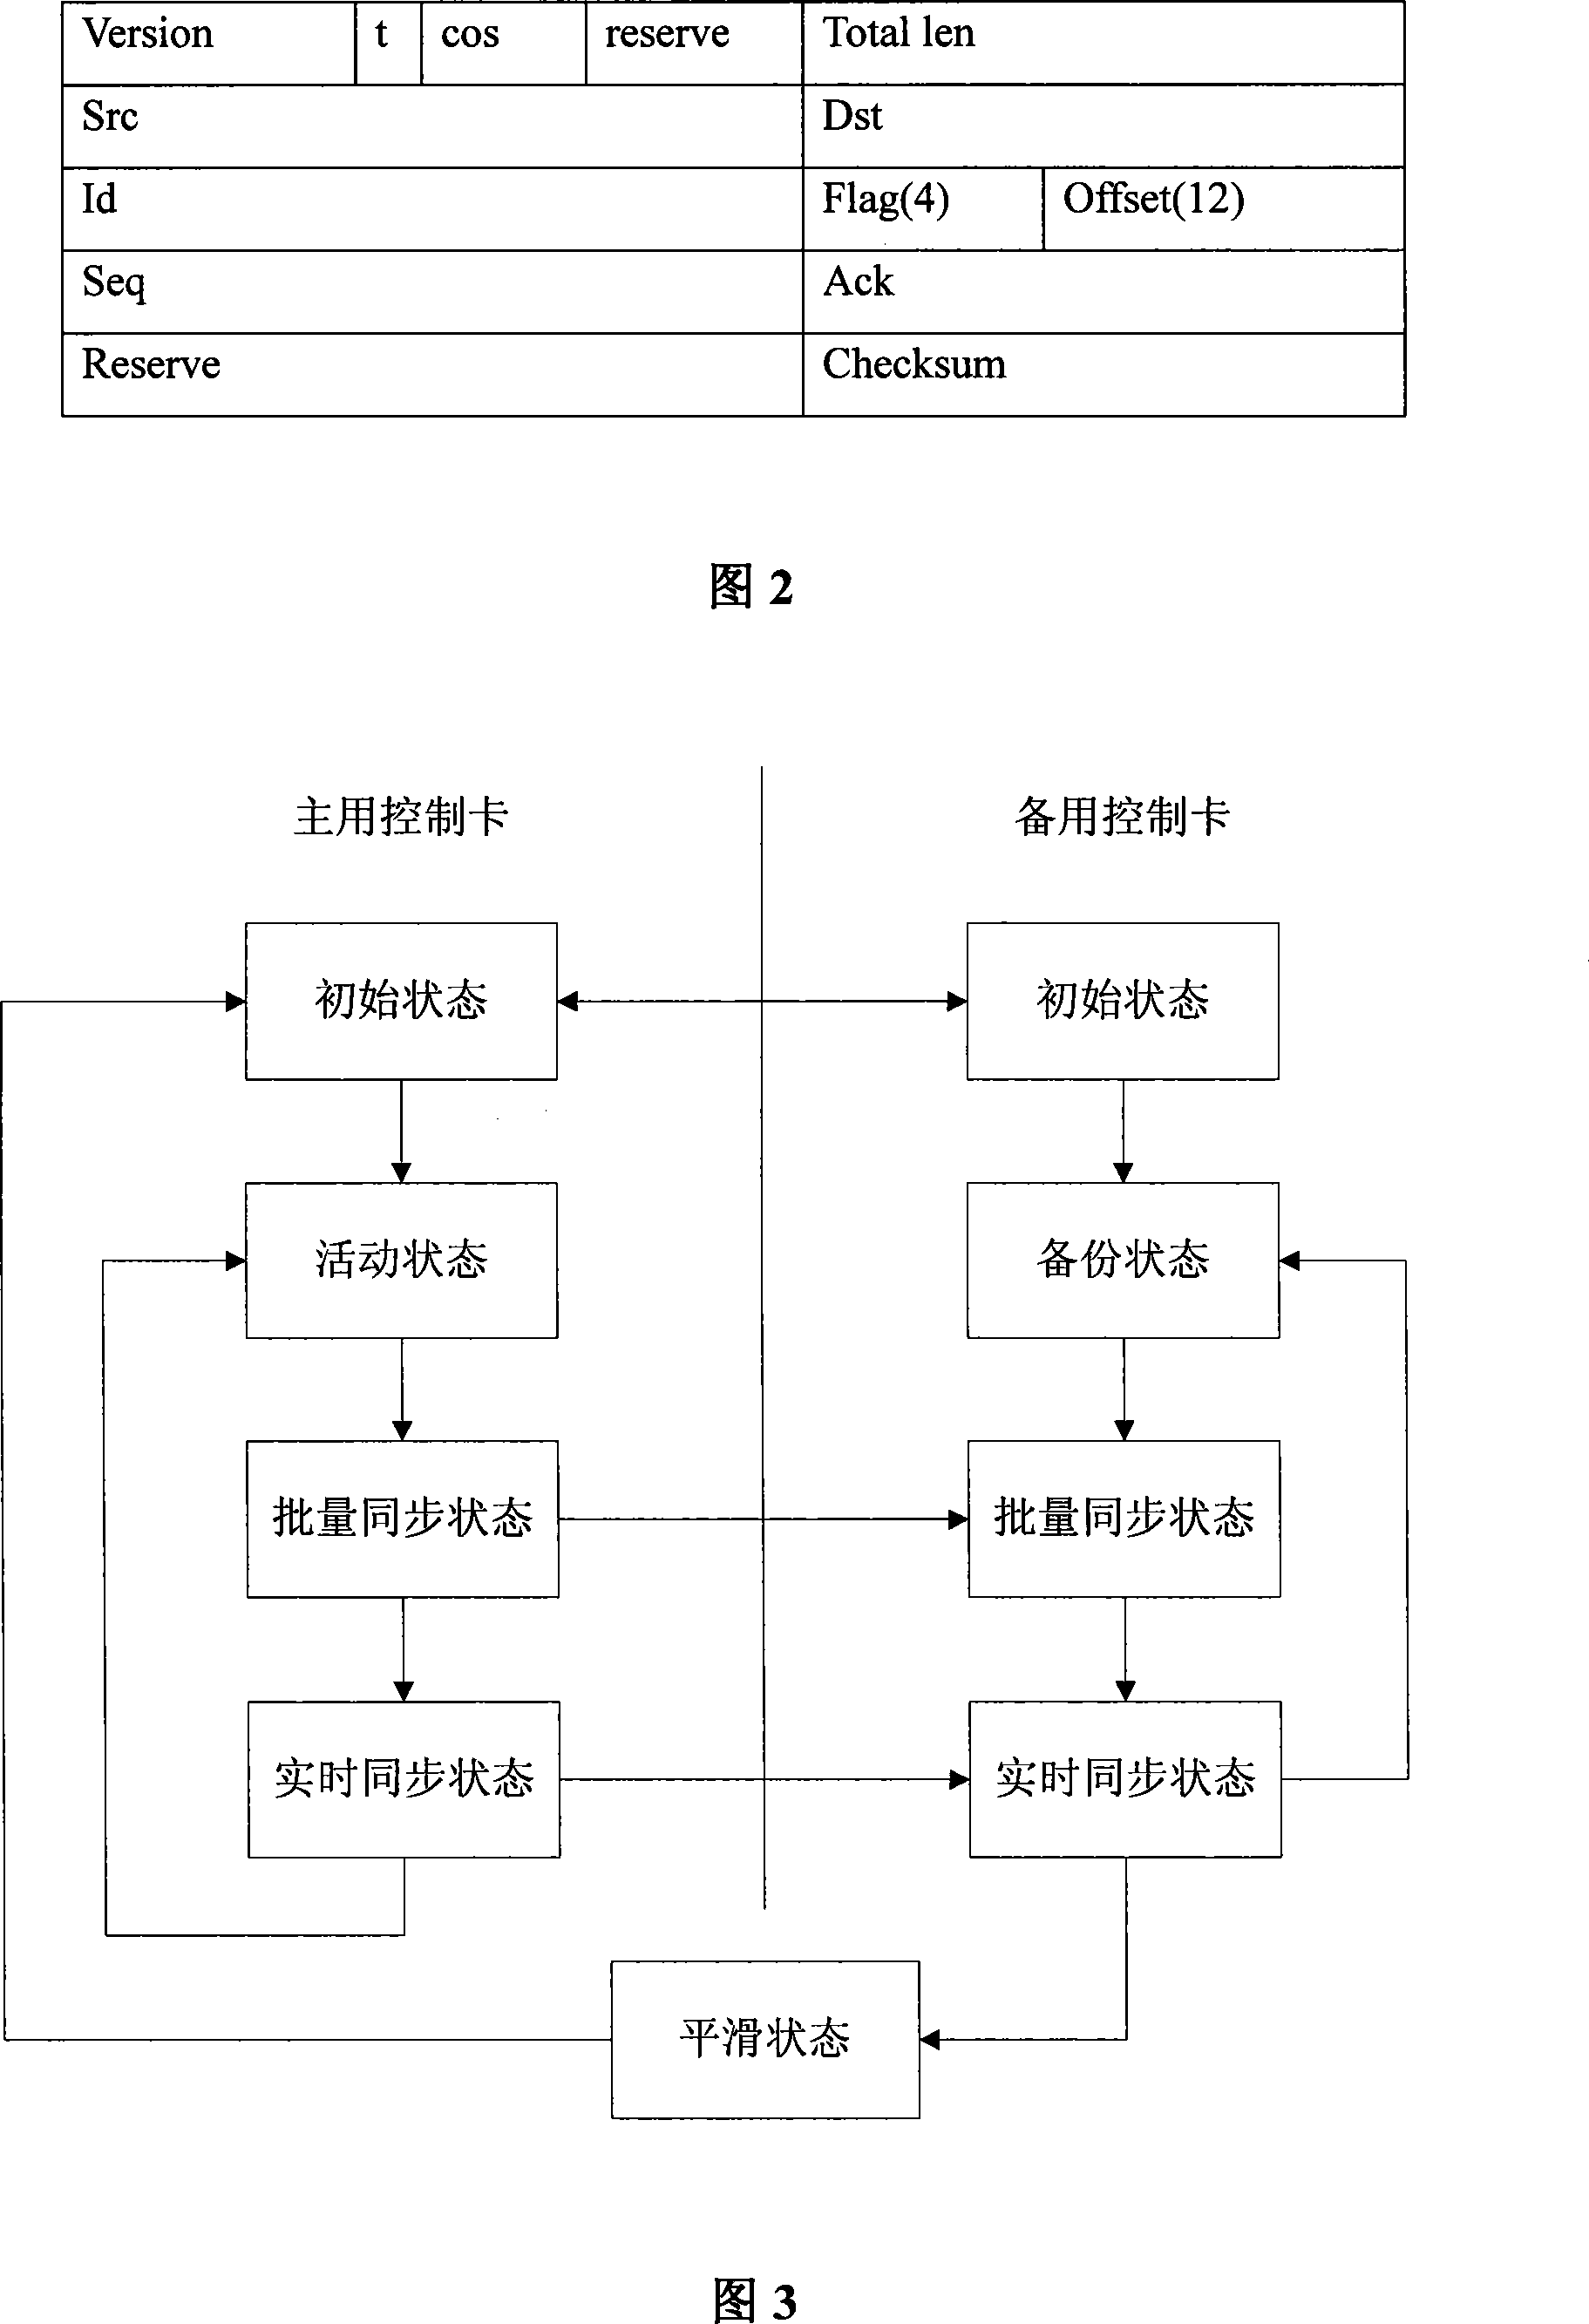 Credible synchronization method of distributed network equipment